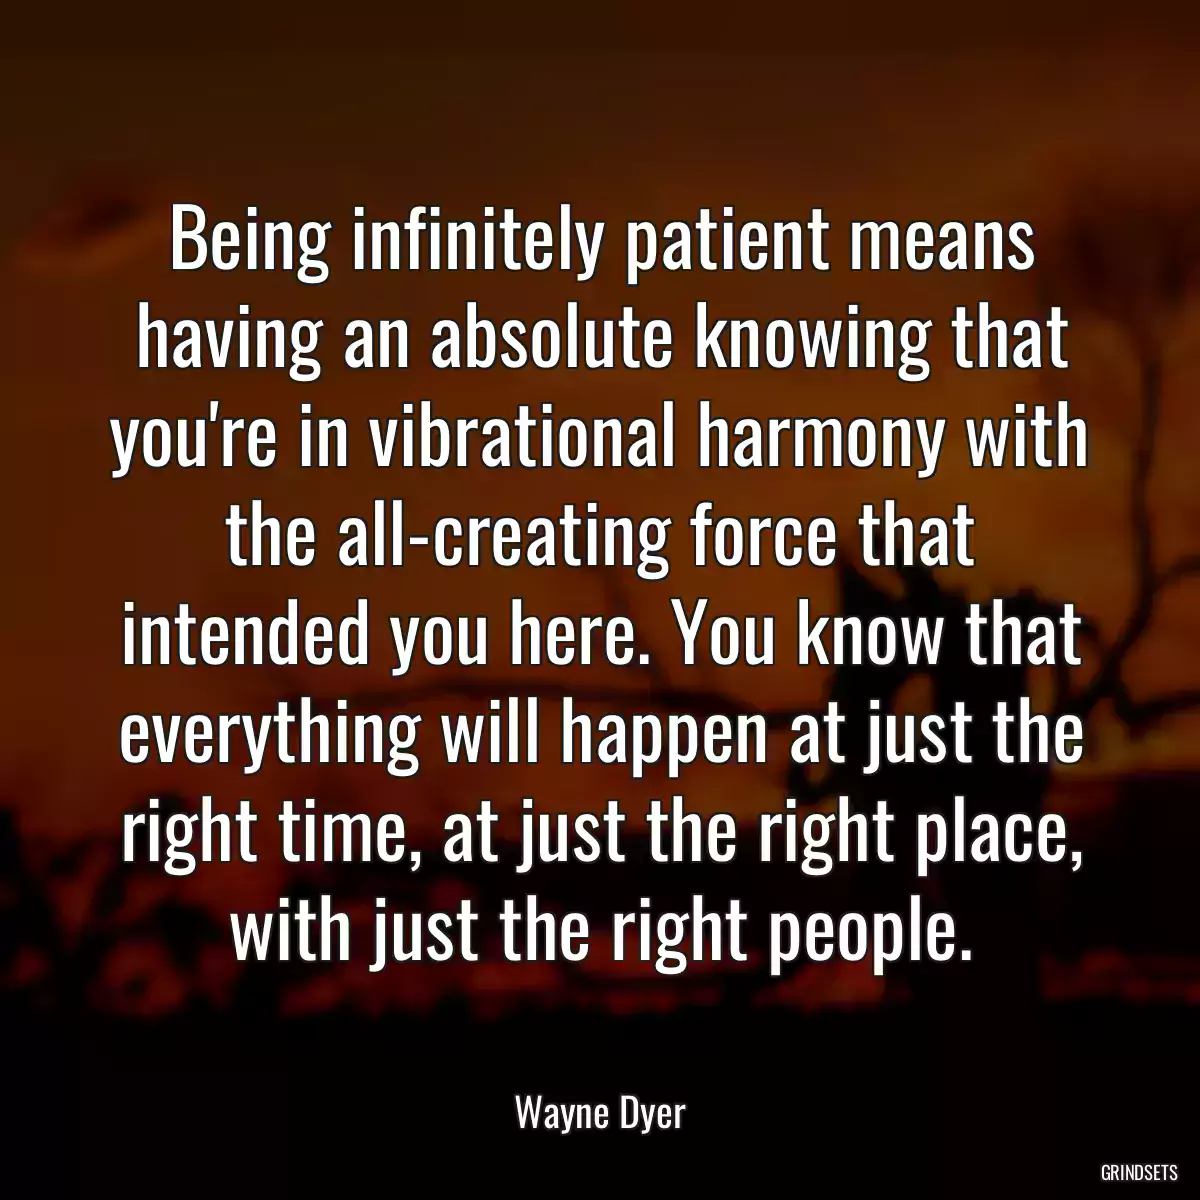 Being infinitely patient means having an absolute knowing that you\'re in vibrational harmony with the all-creating force that intended you here. You know that everything will happen at just the right time, at just the right place, with just the right people.